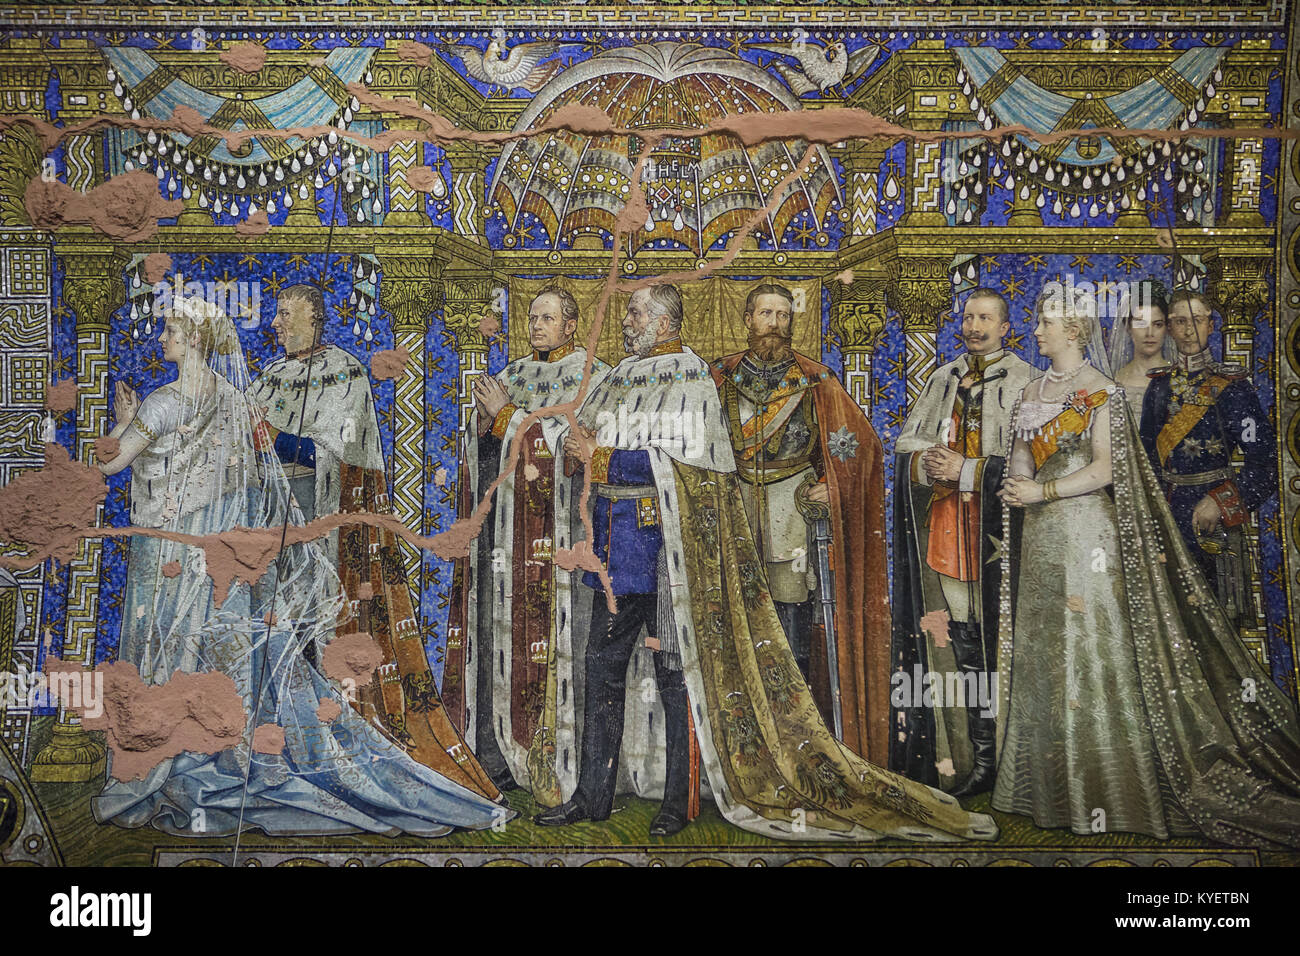 Hohenzollern royal family depicted in the mosaic designed by German painter Hermann Schaper (1905-1906) inside the Kaiser Wilhelm Memorial Church (Kaiser-Wilhelm-Gedächtniskirche) in Berlin, Germany. Members of the House of Hohenzollern are depicted from left to right: Queen Louise and King Friedrich Wilhelm III of Prussia, King Friedrich Wilhelm IV of Prussia, German Emperor Wilhelm I, German Emperor Friedrich III, who reigned 90 days only in 1888, German Emperor Wilhelm II and his spouse Empress Augusta Victoria, German Crown Prince Wilhelm and his spouse Duchess Cecilie. Stock Photo